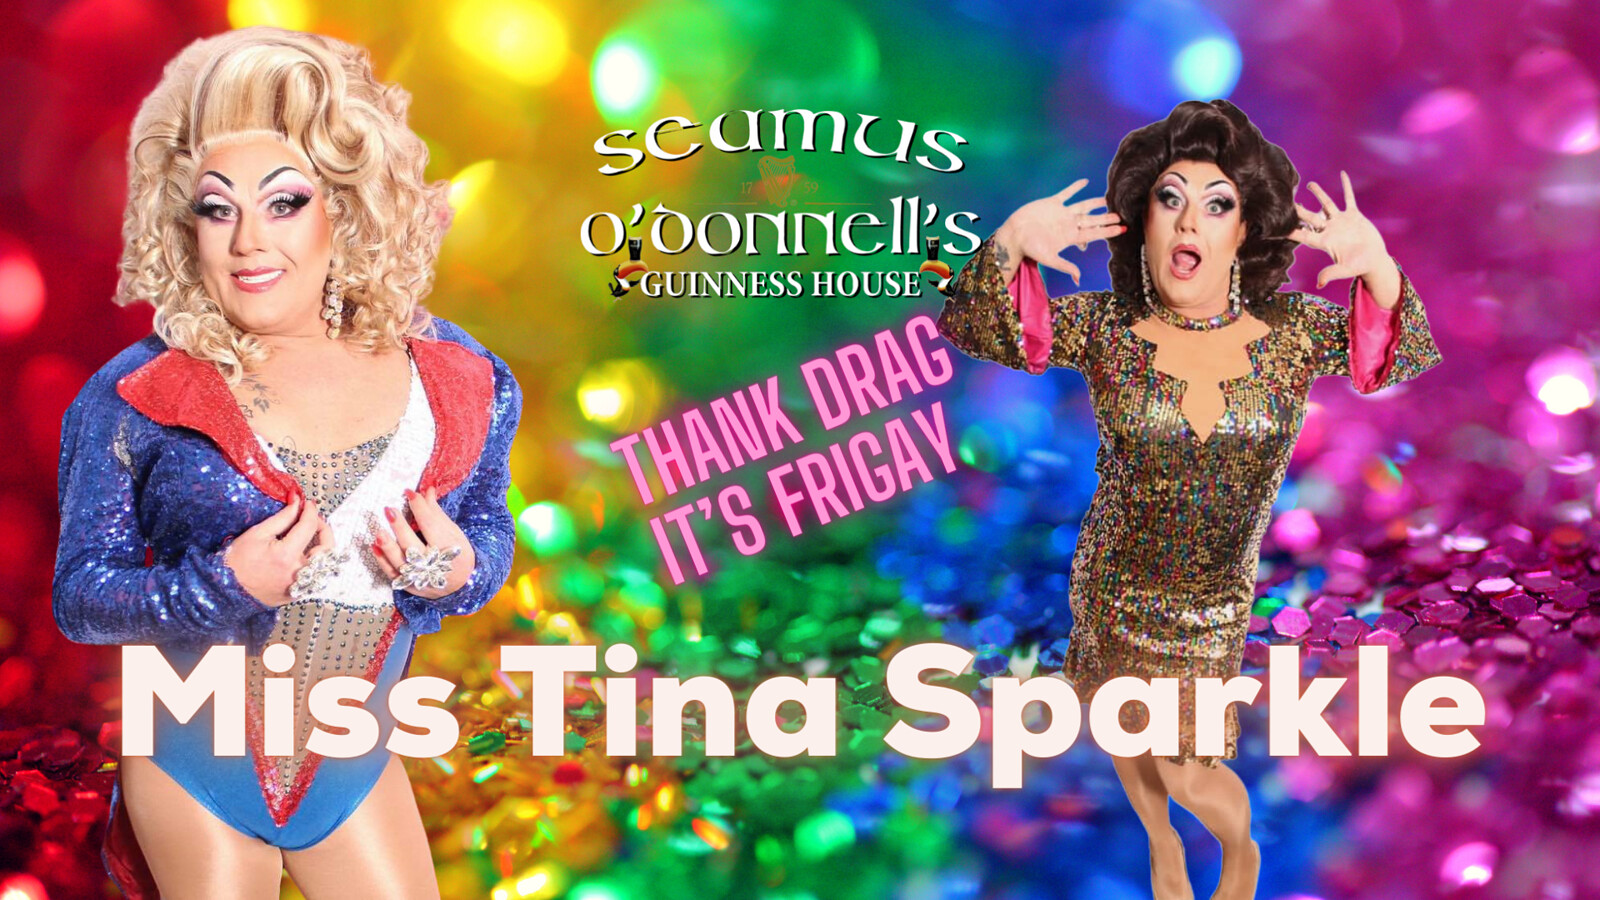 Thank Drag Its FriGay with Tina Sparkle at Seamus O'Donnell's